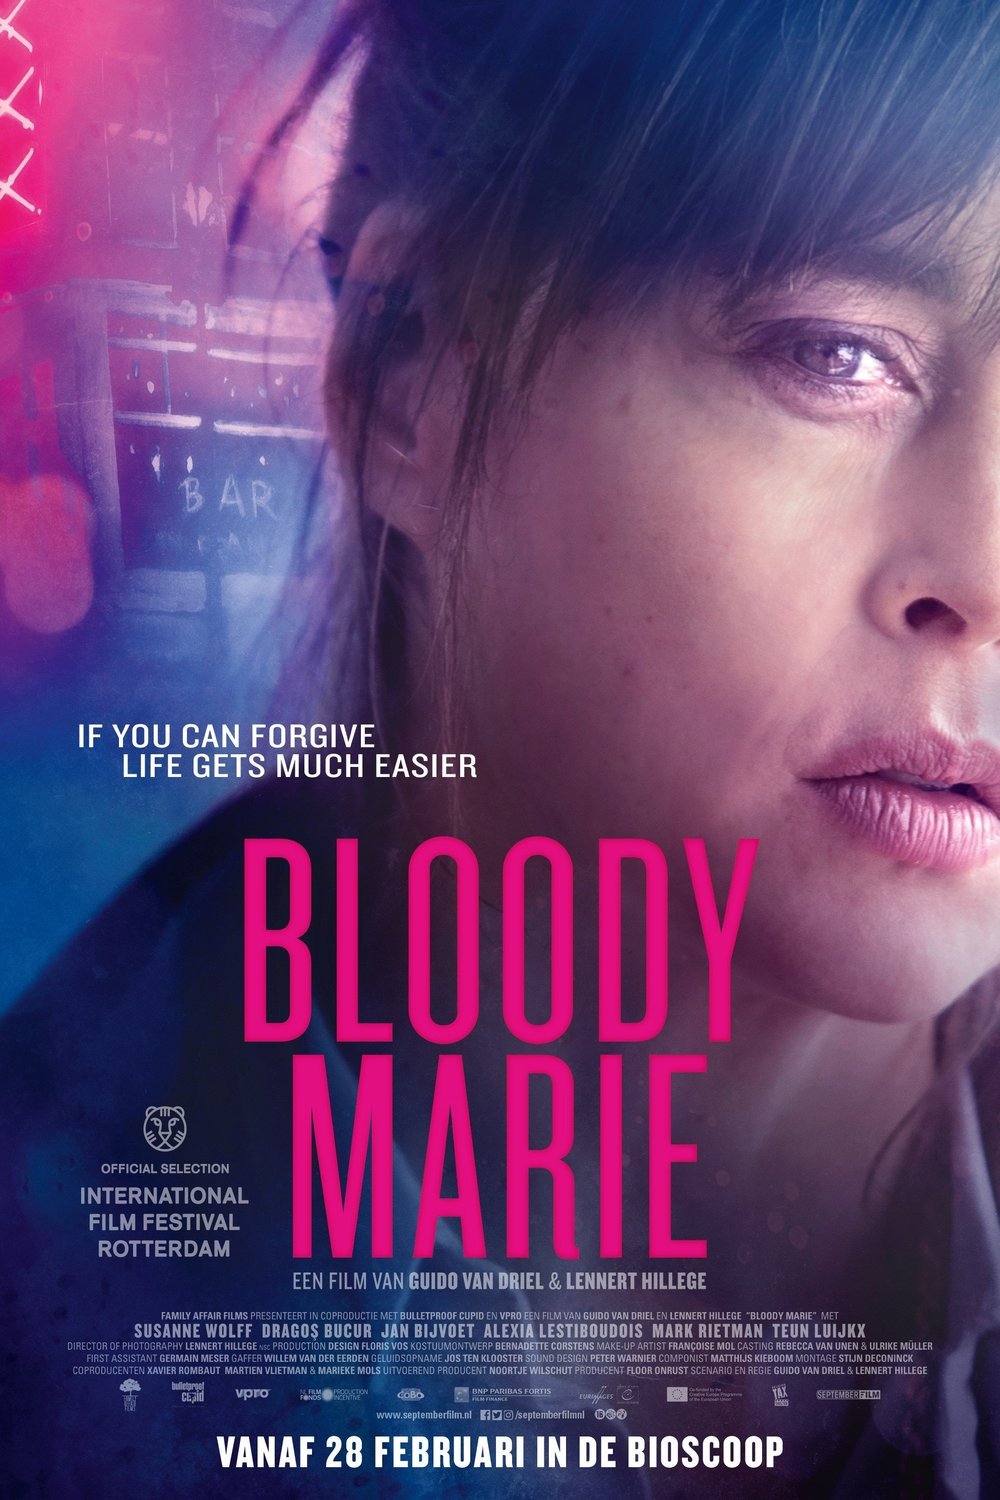 Dutch poster of the movie Bloody Marie